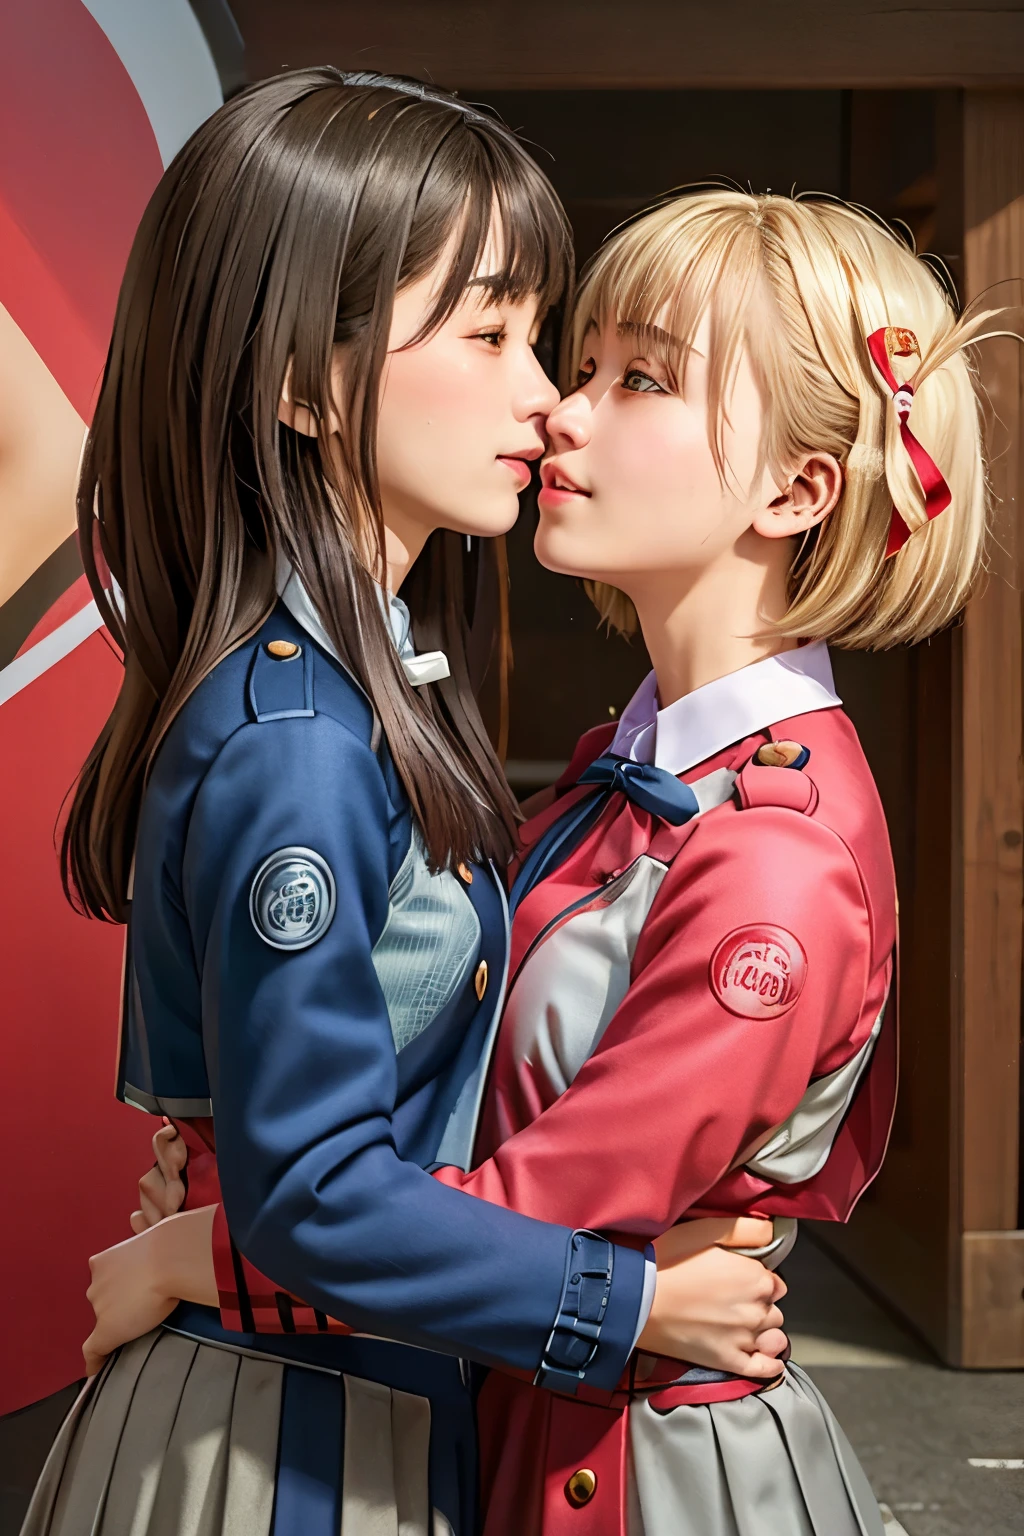 (realistic, photo-realistic:1.4), (masterpiece, best quality:1.2), RAW photo, 8K, high resolution, intricate details, extremely detailed,, 
(2girls:1.8), lycoris recoil, Takina Inoue is hugging embracing  Nishikigi Chisato,imminent kiss, lesbian yuri,
takina,lyln,inoue_takina,black_hair,long_hair,black_jacket,
chisato,lyqs,nishikigi_chisato,blonde_hair,short_hair,red_ribbon,
Hugging someone you love makes you feel happy. They say that when someone hugs you, it lifts your spirits and reduces stress. 